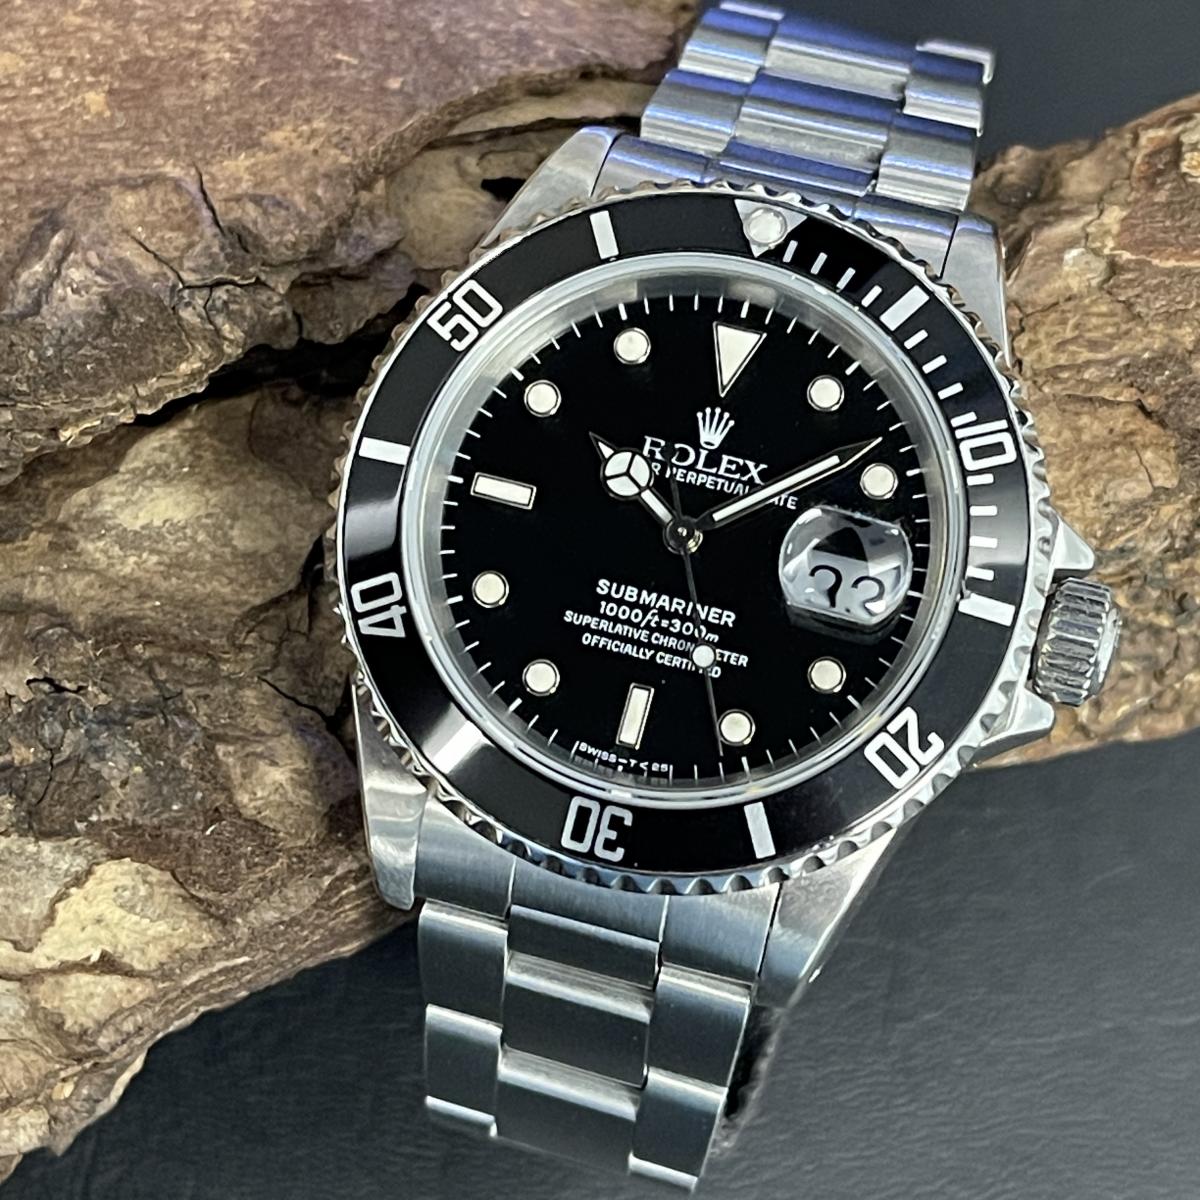 Rolex Oyster Perpetual Submariner Date - Ref. 16610 - FULL SET 1991